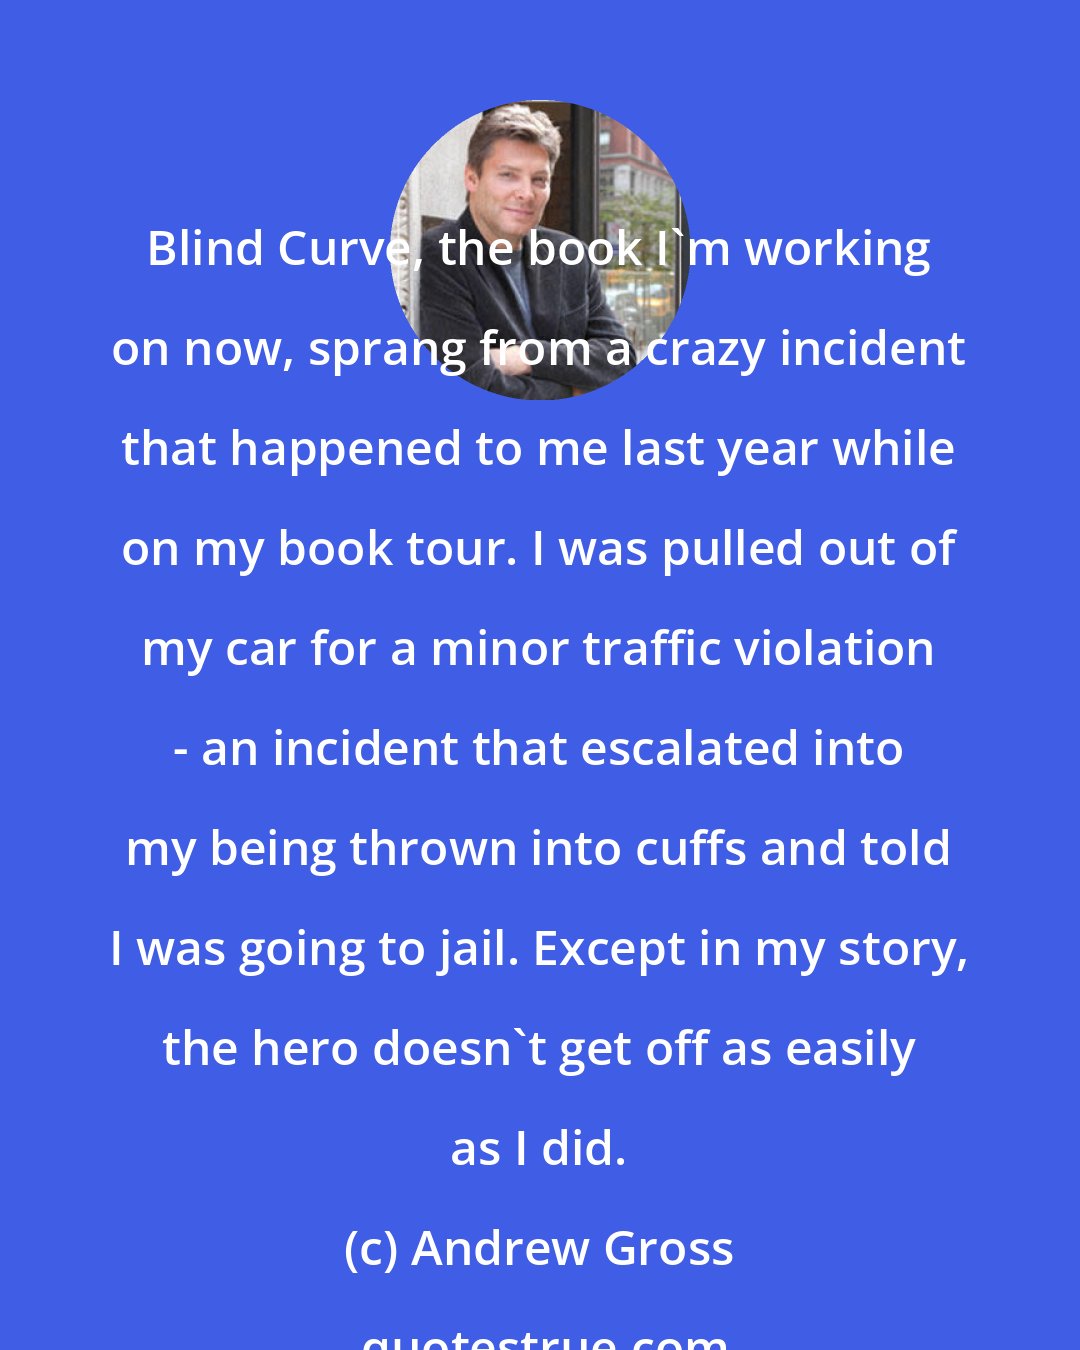 Andrew Gross: Blind Curve, the book I'm working on now, sprang from a crazy incident that happened to me last year while on my book tour. I was pulled out of my car for a minor traffic violation - an incident that escalated into my being thrown into cuffs and told I was going to jail. Except in my story, the hero doesn't get off as easily as I did.